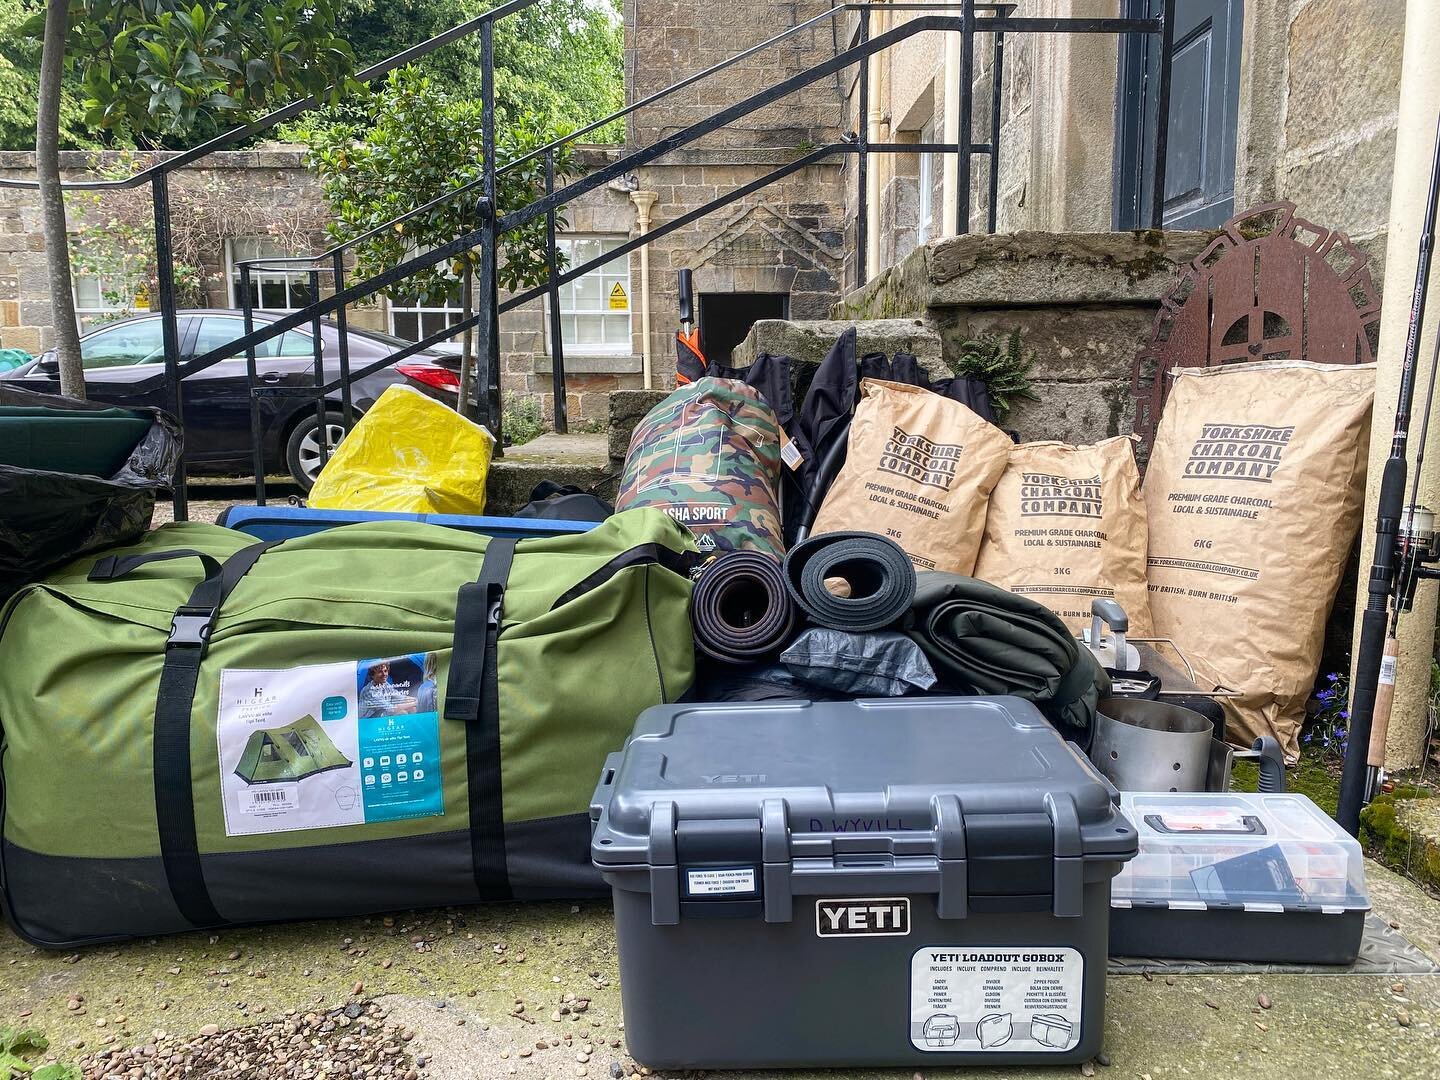 Packing light again ! 
All the essentials for a family camping trip. 
🛶🏔⛺️🏕🛖🕯💡🪓🍔🌭🥩🍳

#camping #bbq #familytime #cookingoutdoors #tentlife #cookingoncoalstastesbetter #yorkshirecharcoalcompany #onamission #ontour #scoutshonor